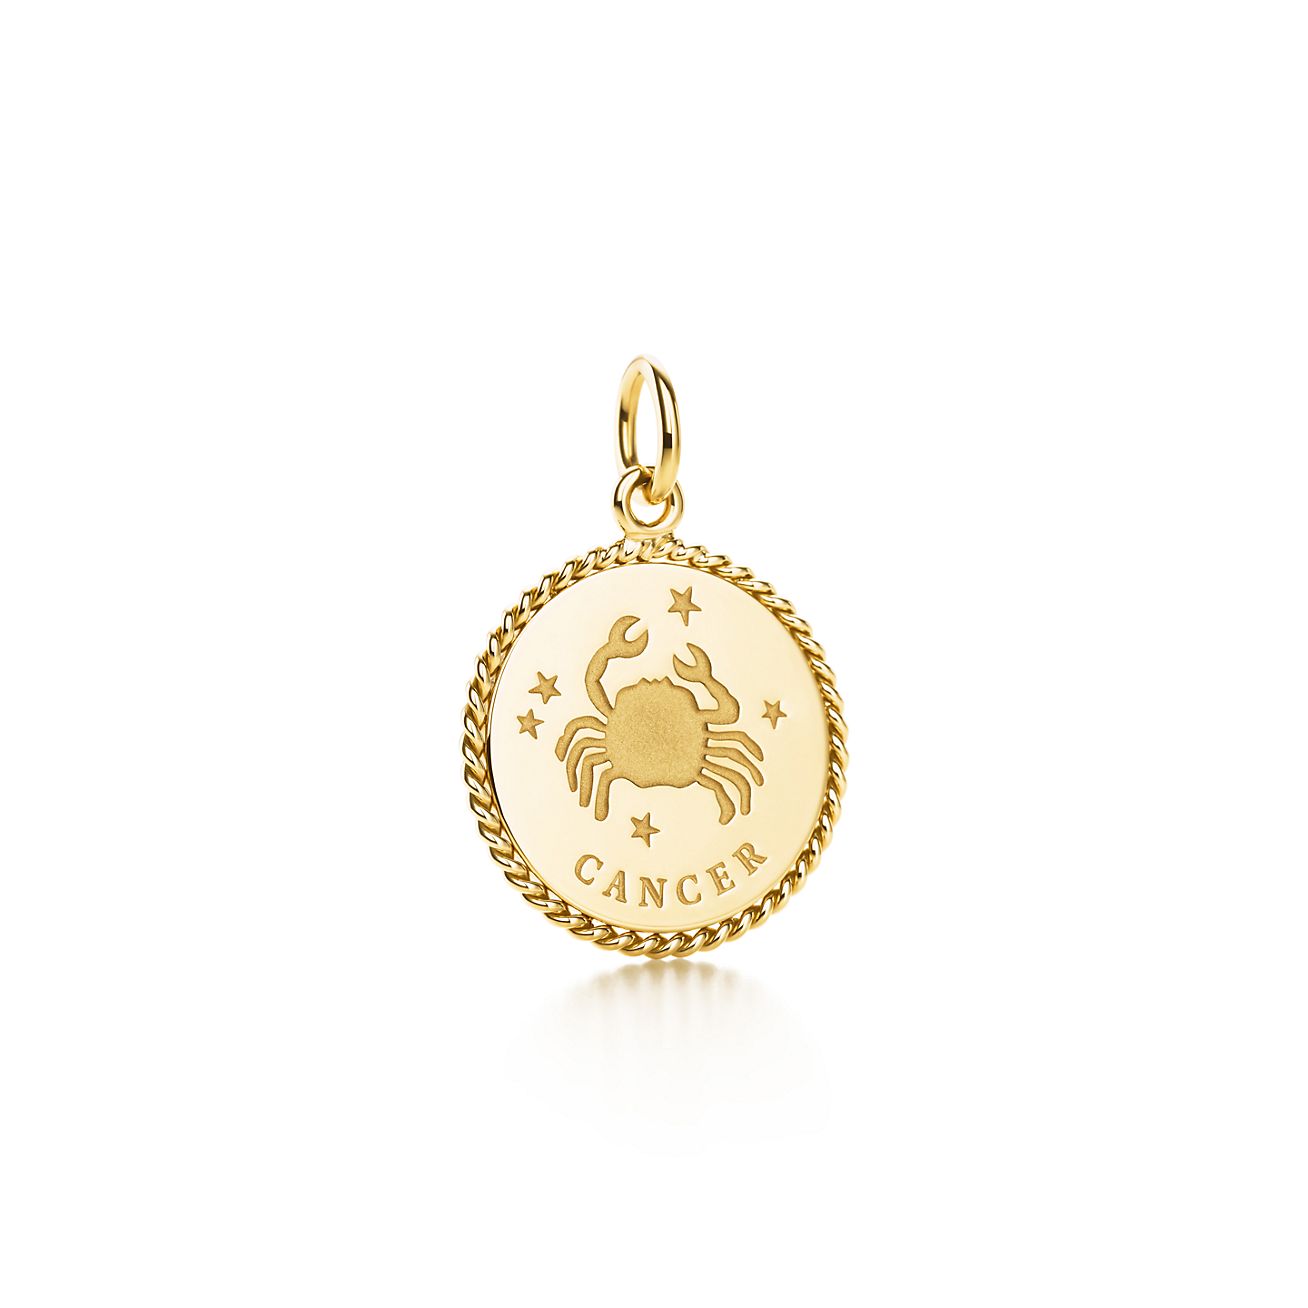 Zodiac charm in 18K gold. All signs 